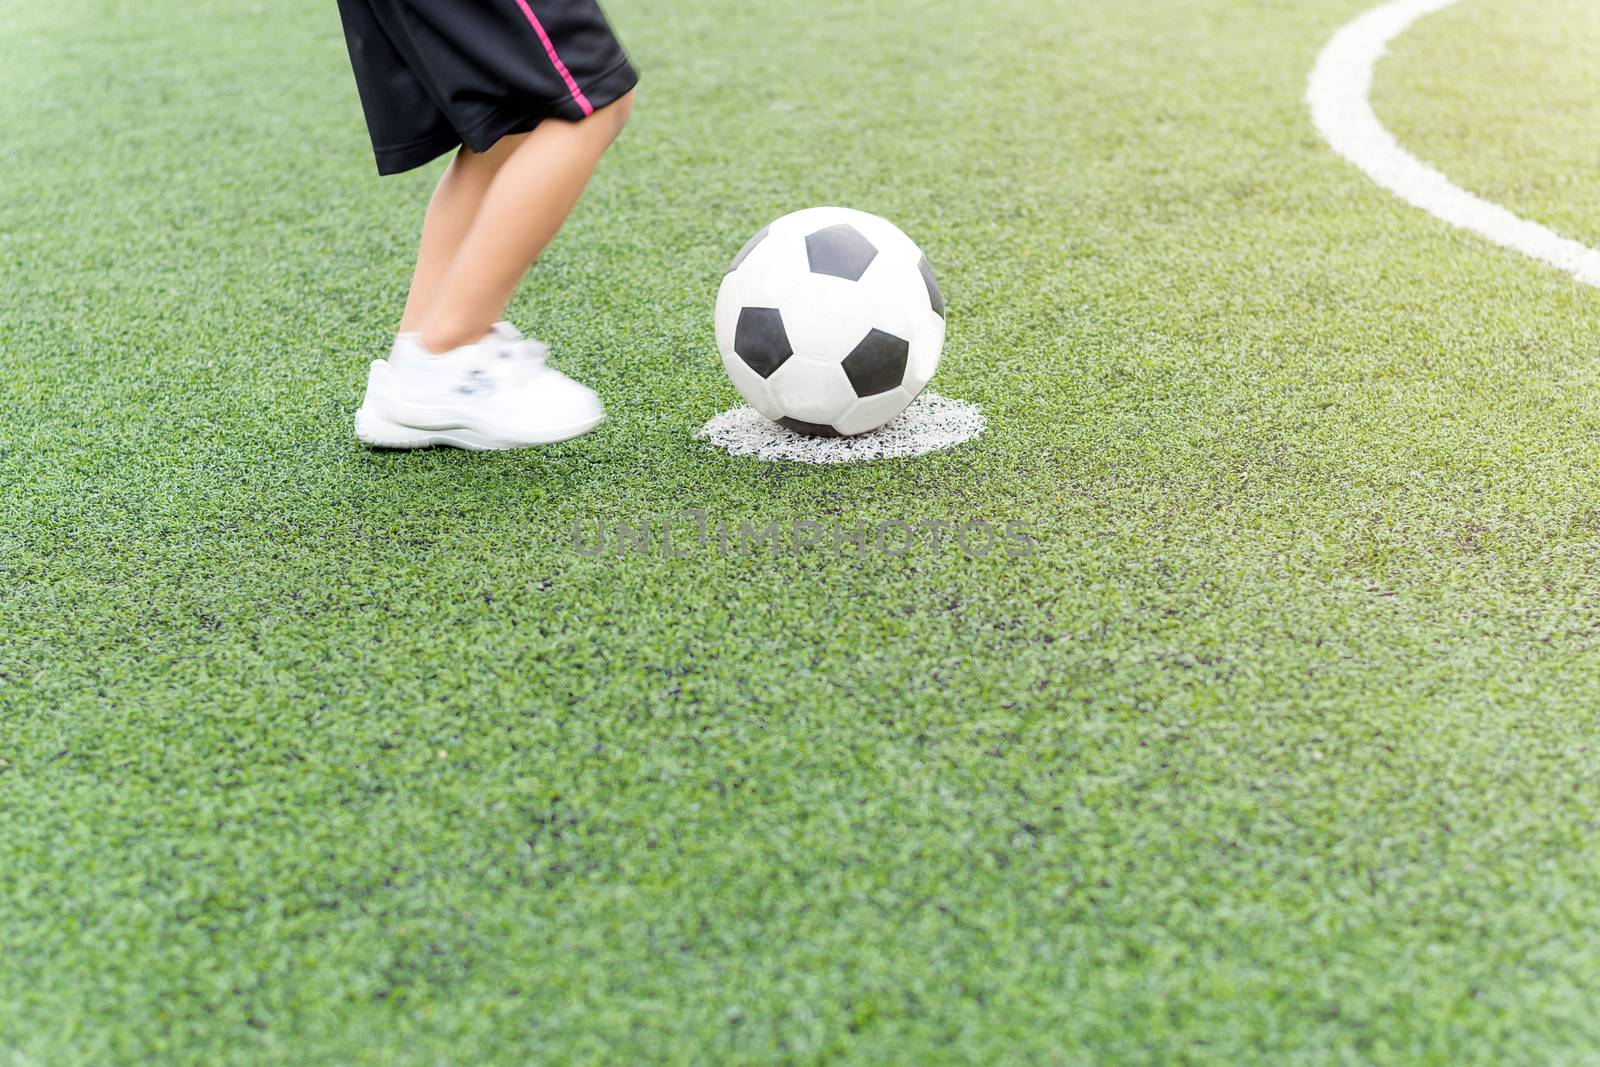 Asian boy playing soccer in the artificial grass field.